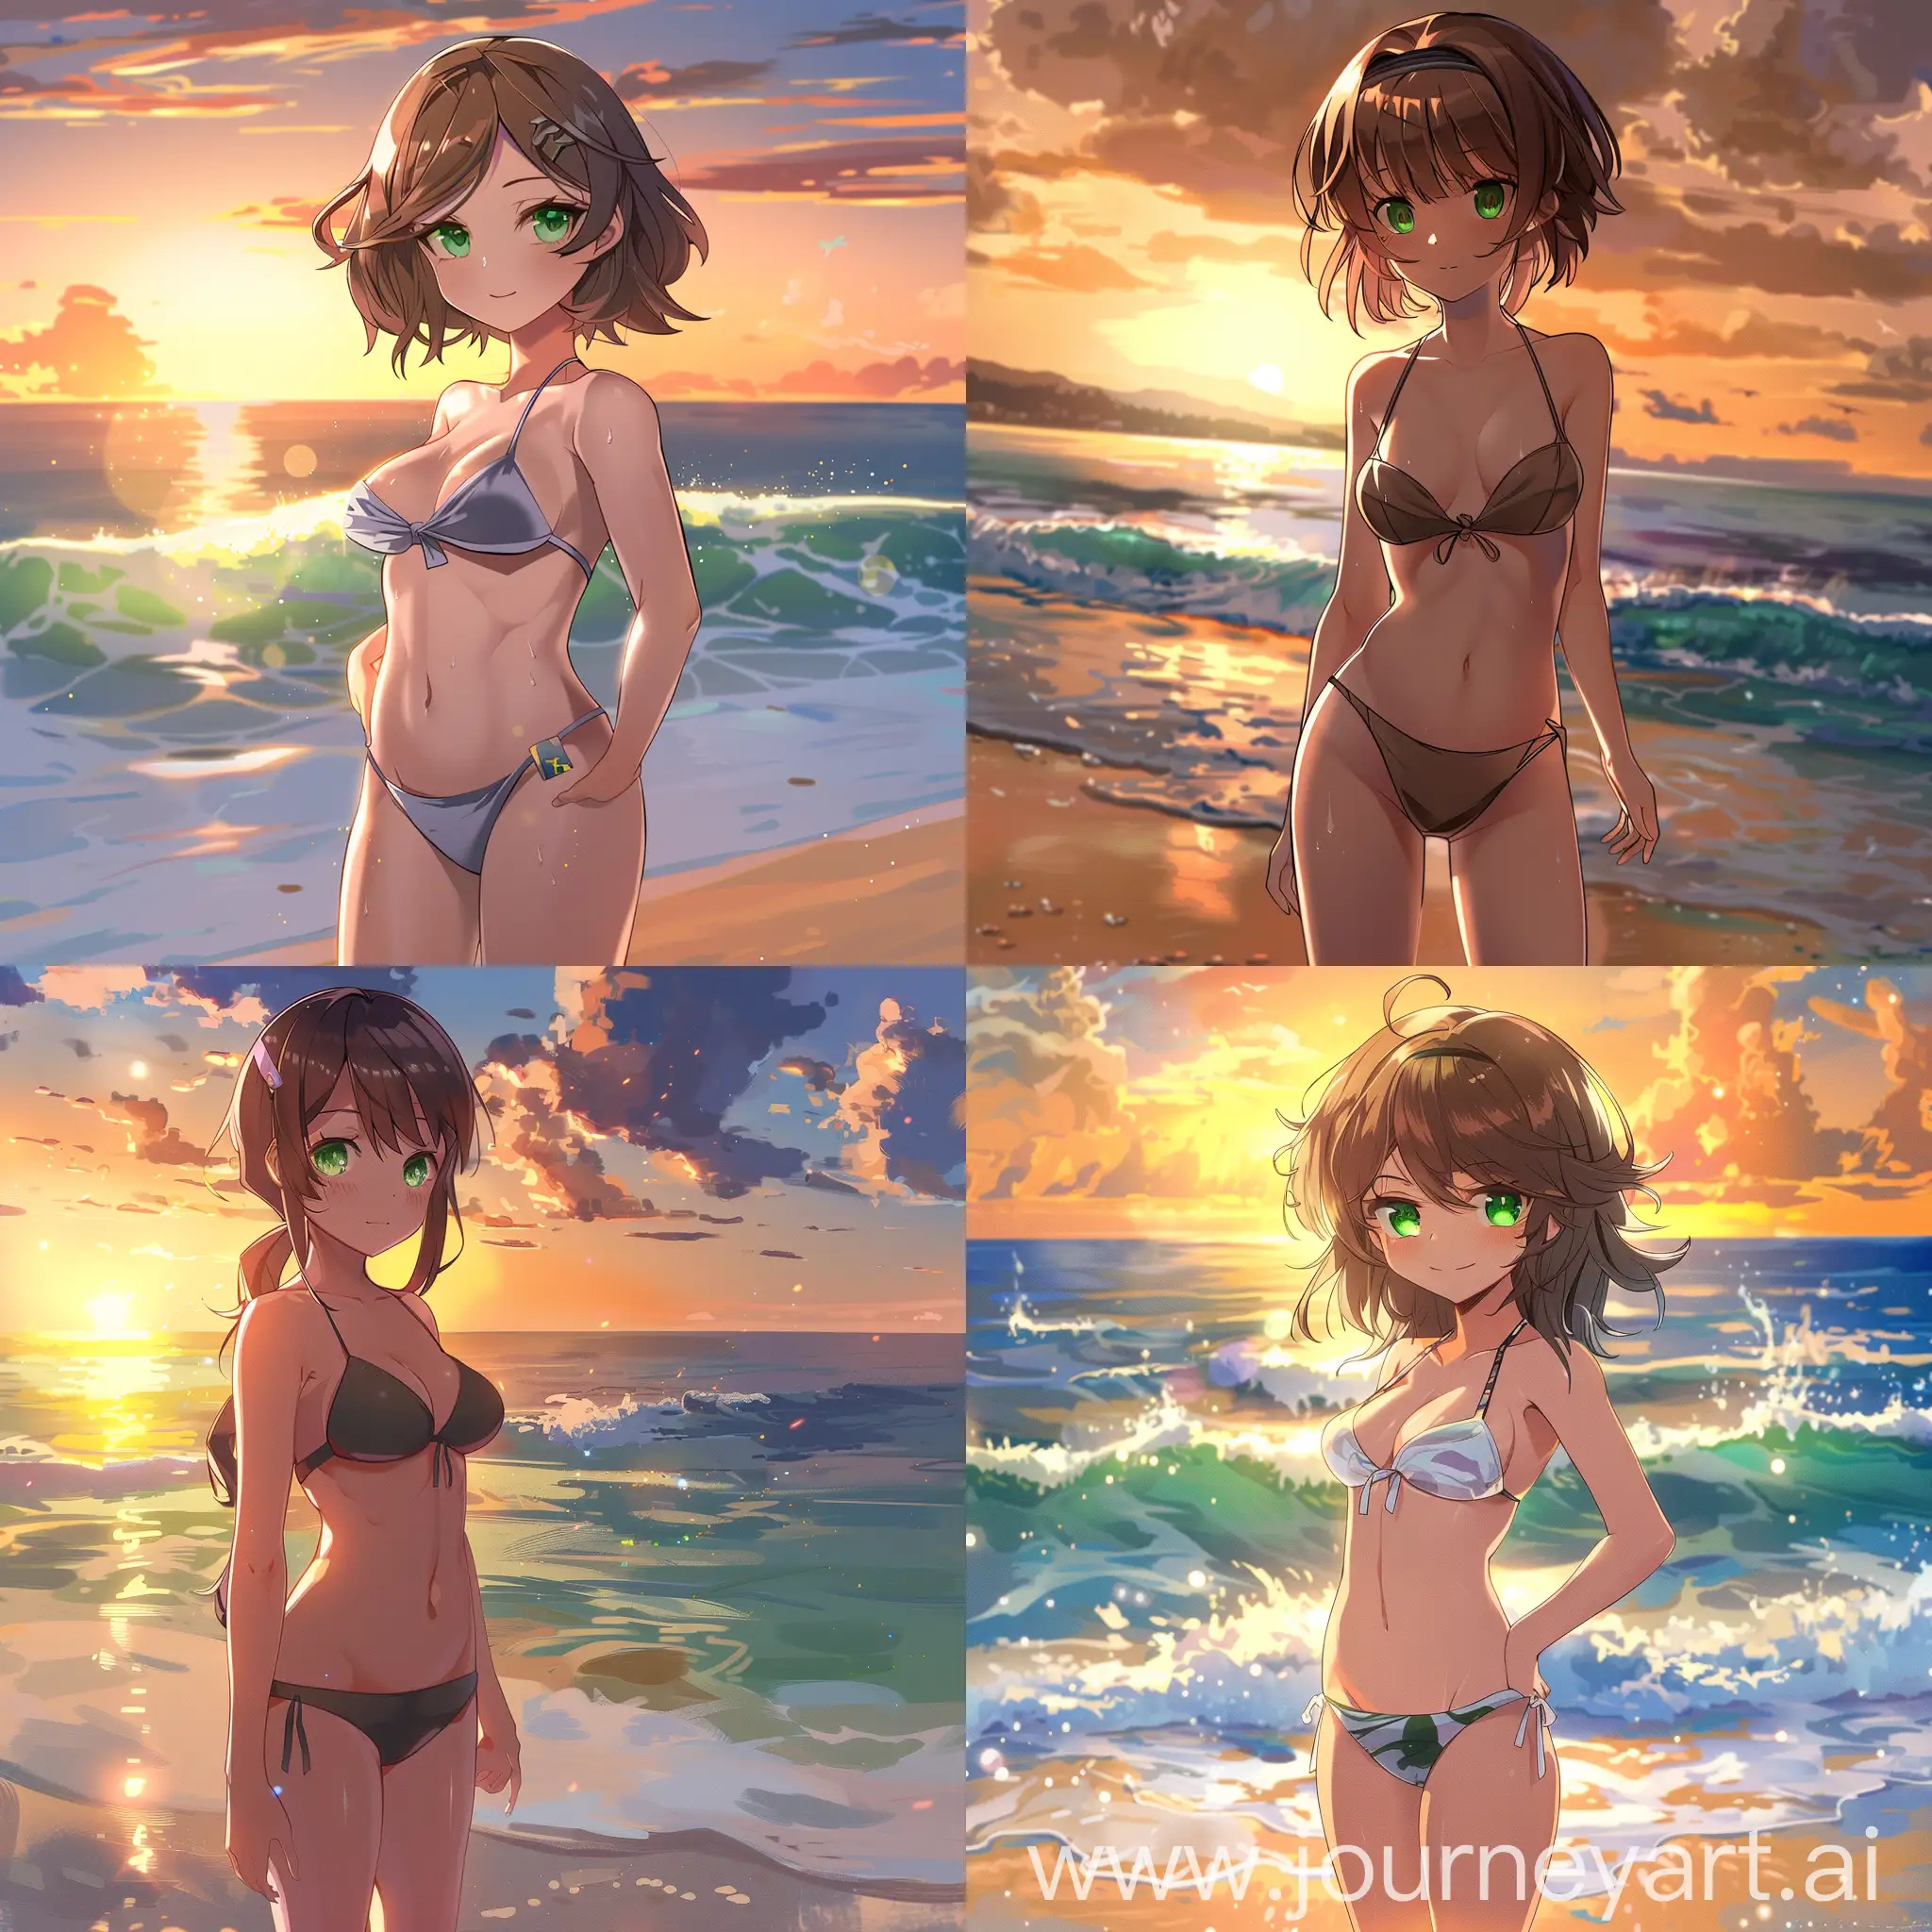 A gamer girl stands on the beach in a swimsuit, she has green eyes and brown hair, sunset and sea in the background